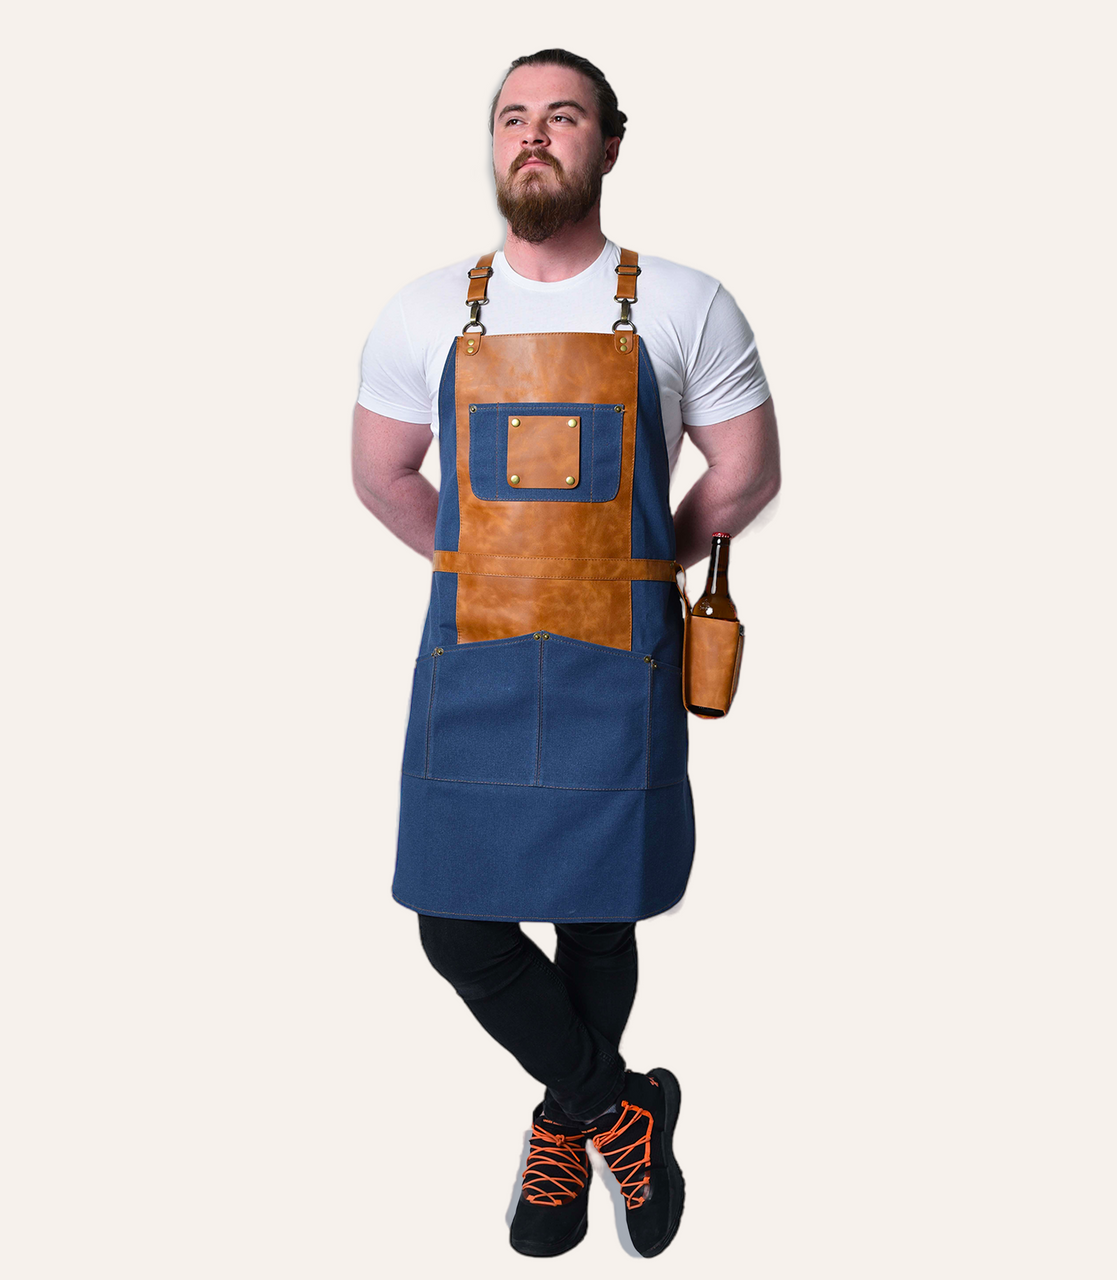 Buy Apron Leather Straps Online In India - Etsy India